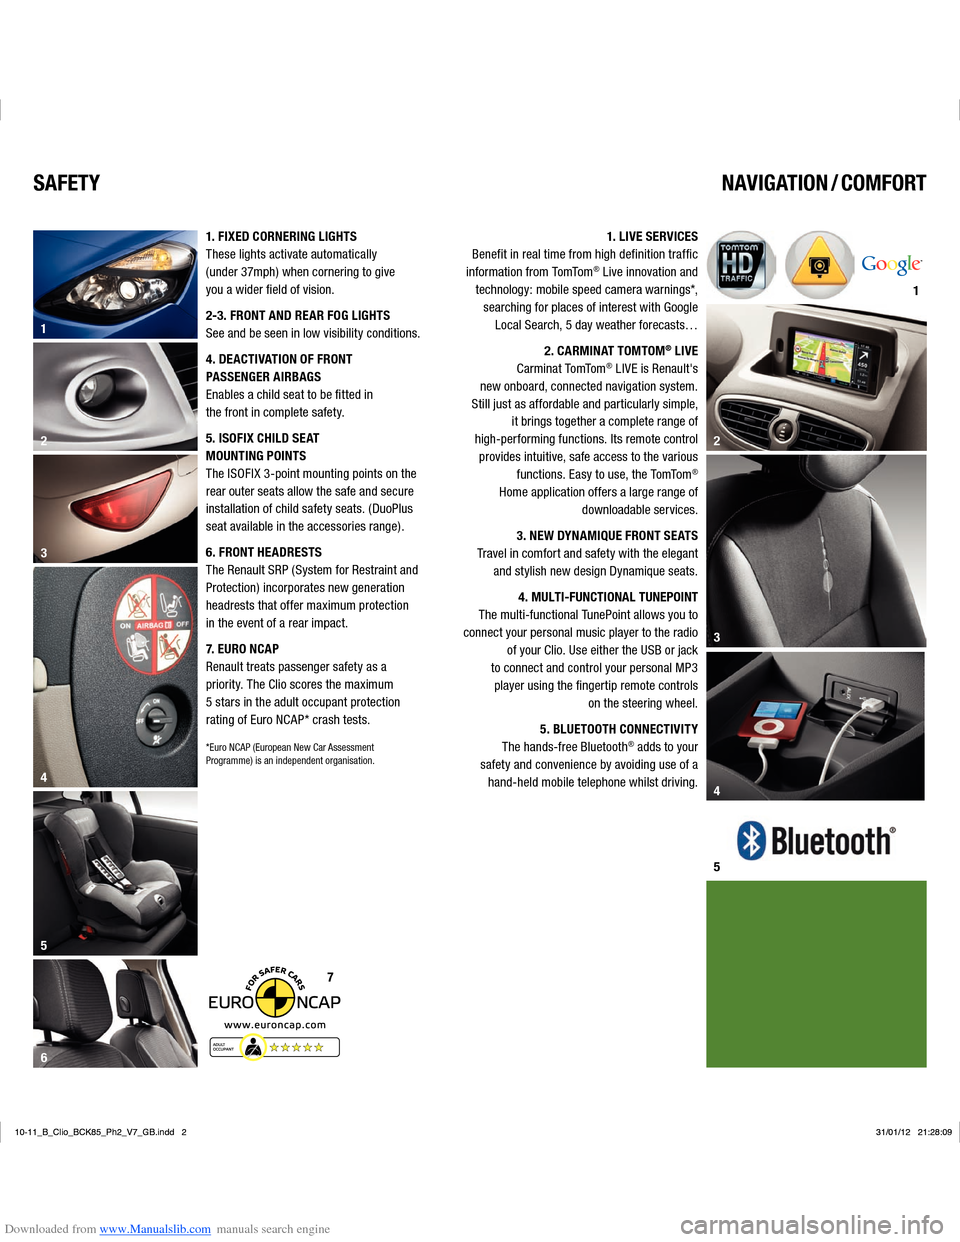 RENAULT CLIO 2012 X85 / 3.G User Guide Downloaded from www.Manualslib.com manuals search engine 56
2 1
4 3
7
21
3
4
5
SAFETY NAVIGATION / COMFORT
1. FIXED CORNERING LIGHTS
These lights activate automatically 
(under 37mph) when cornering t